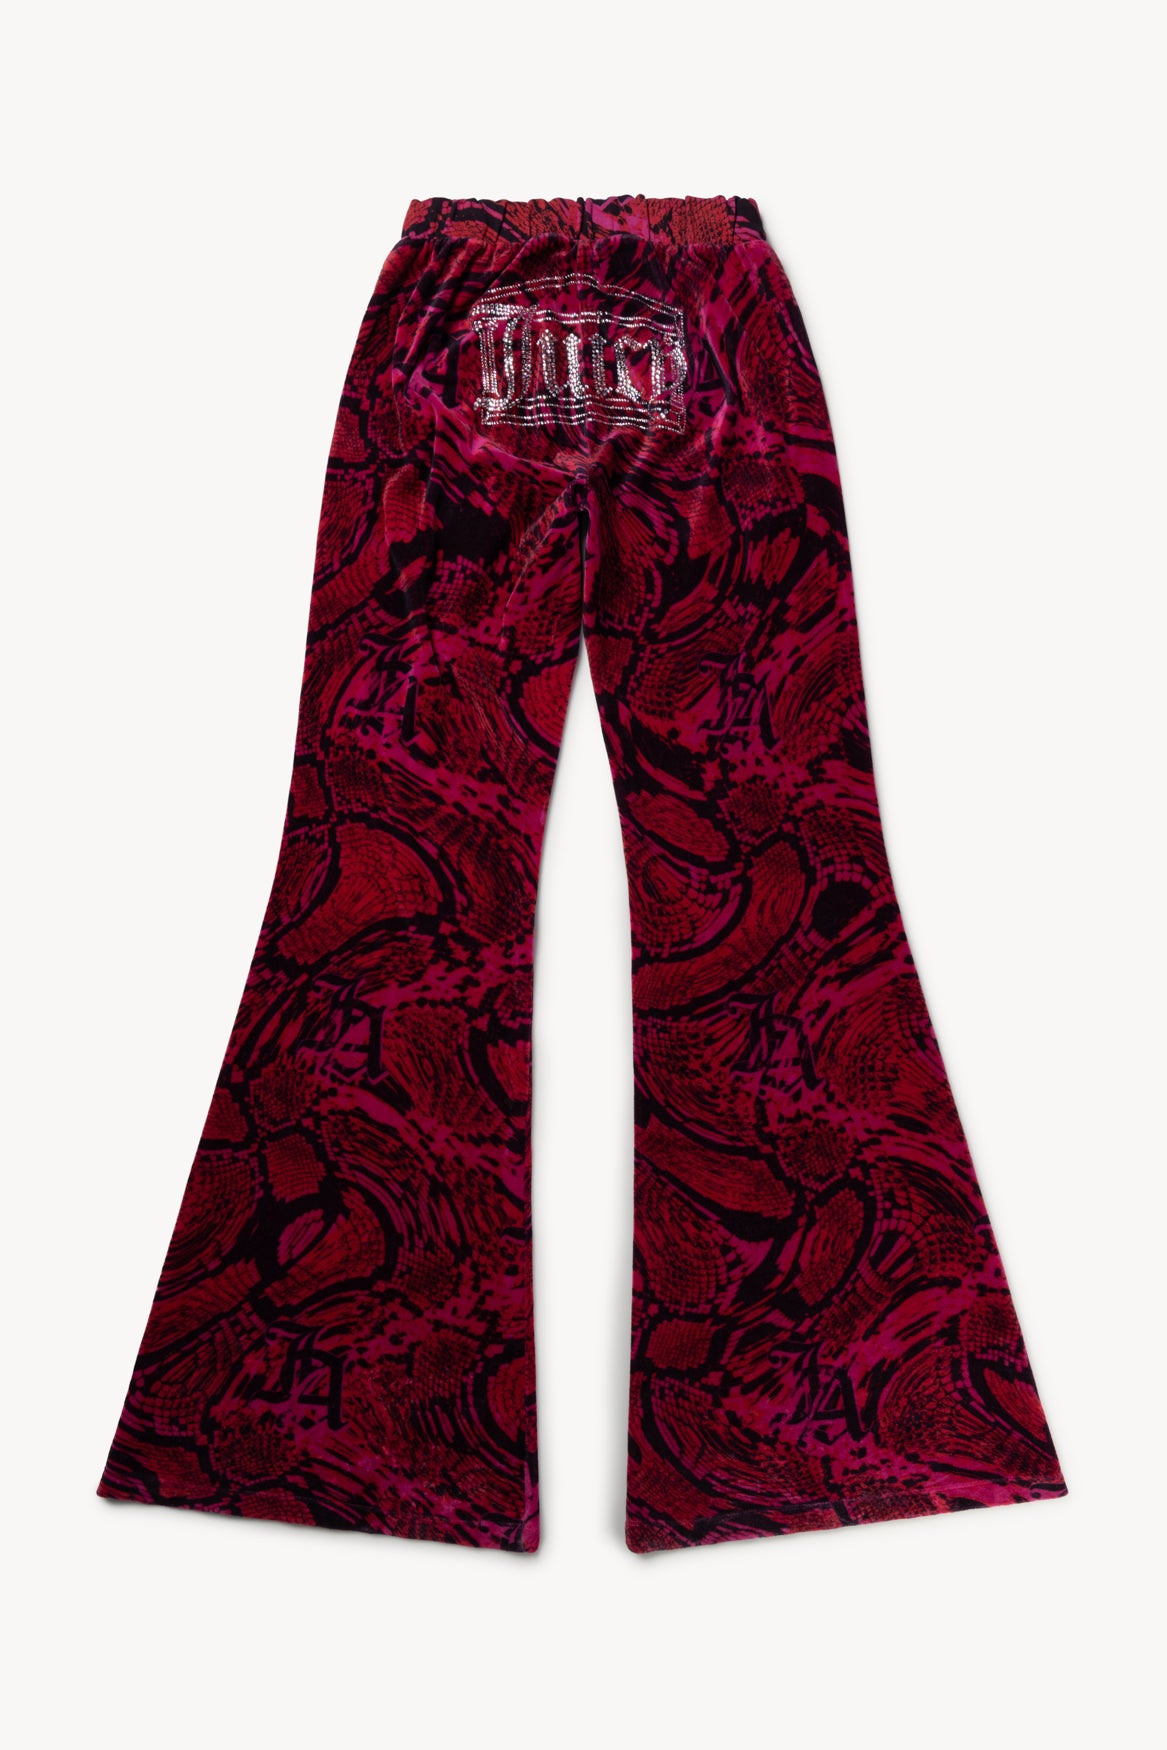 Load image into Gallery viewer, Aries x Juicy Couture Psysnake Flared Sweatpant